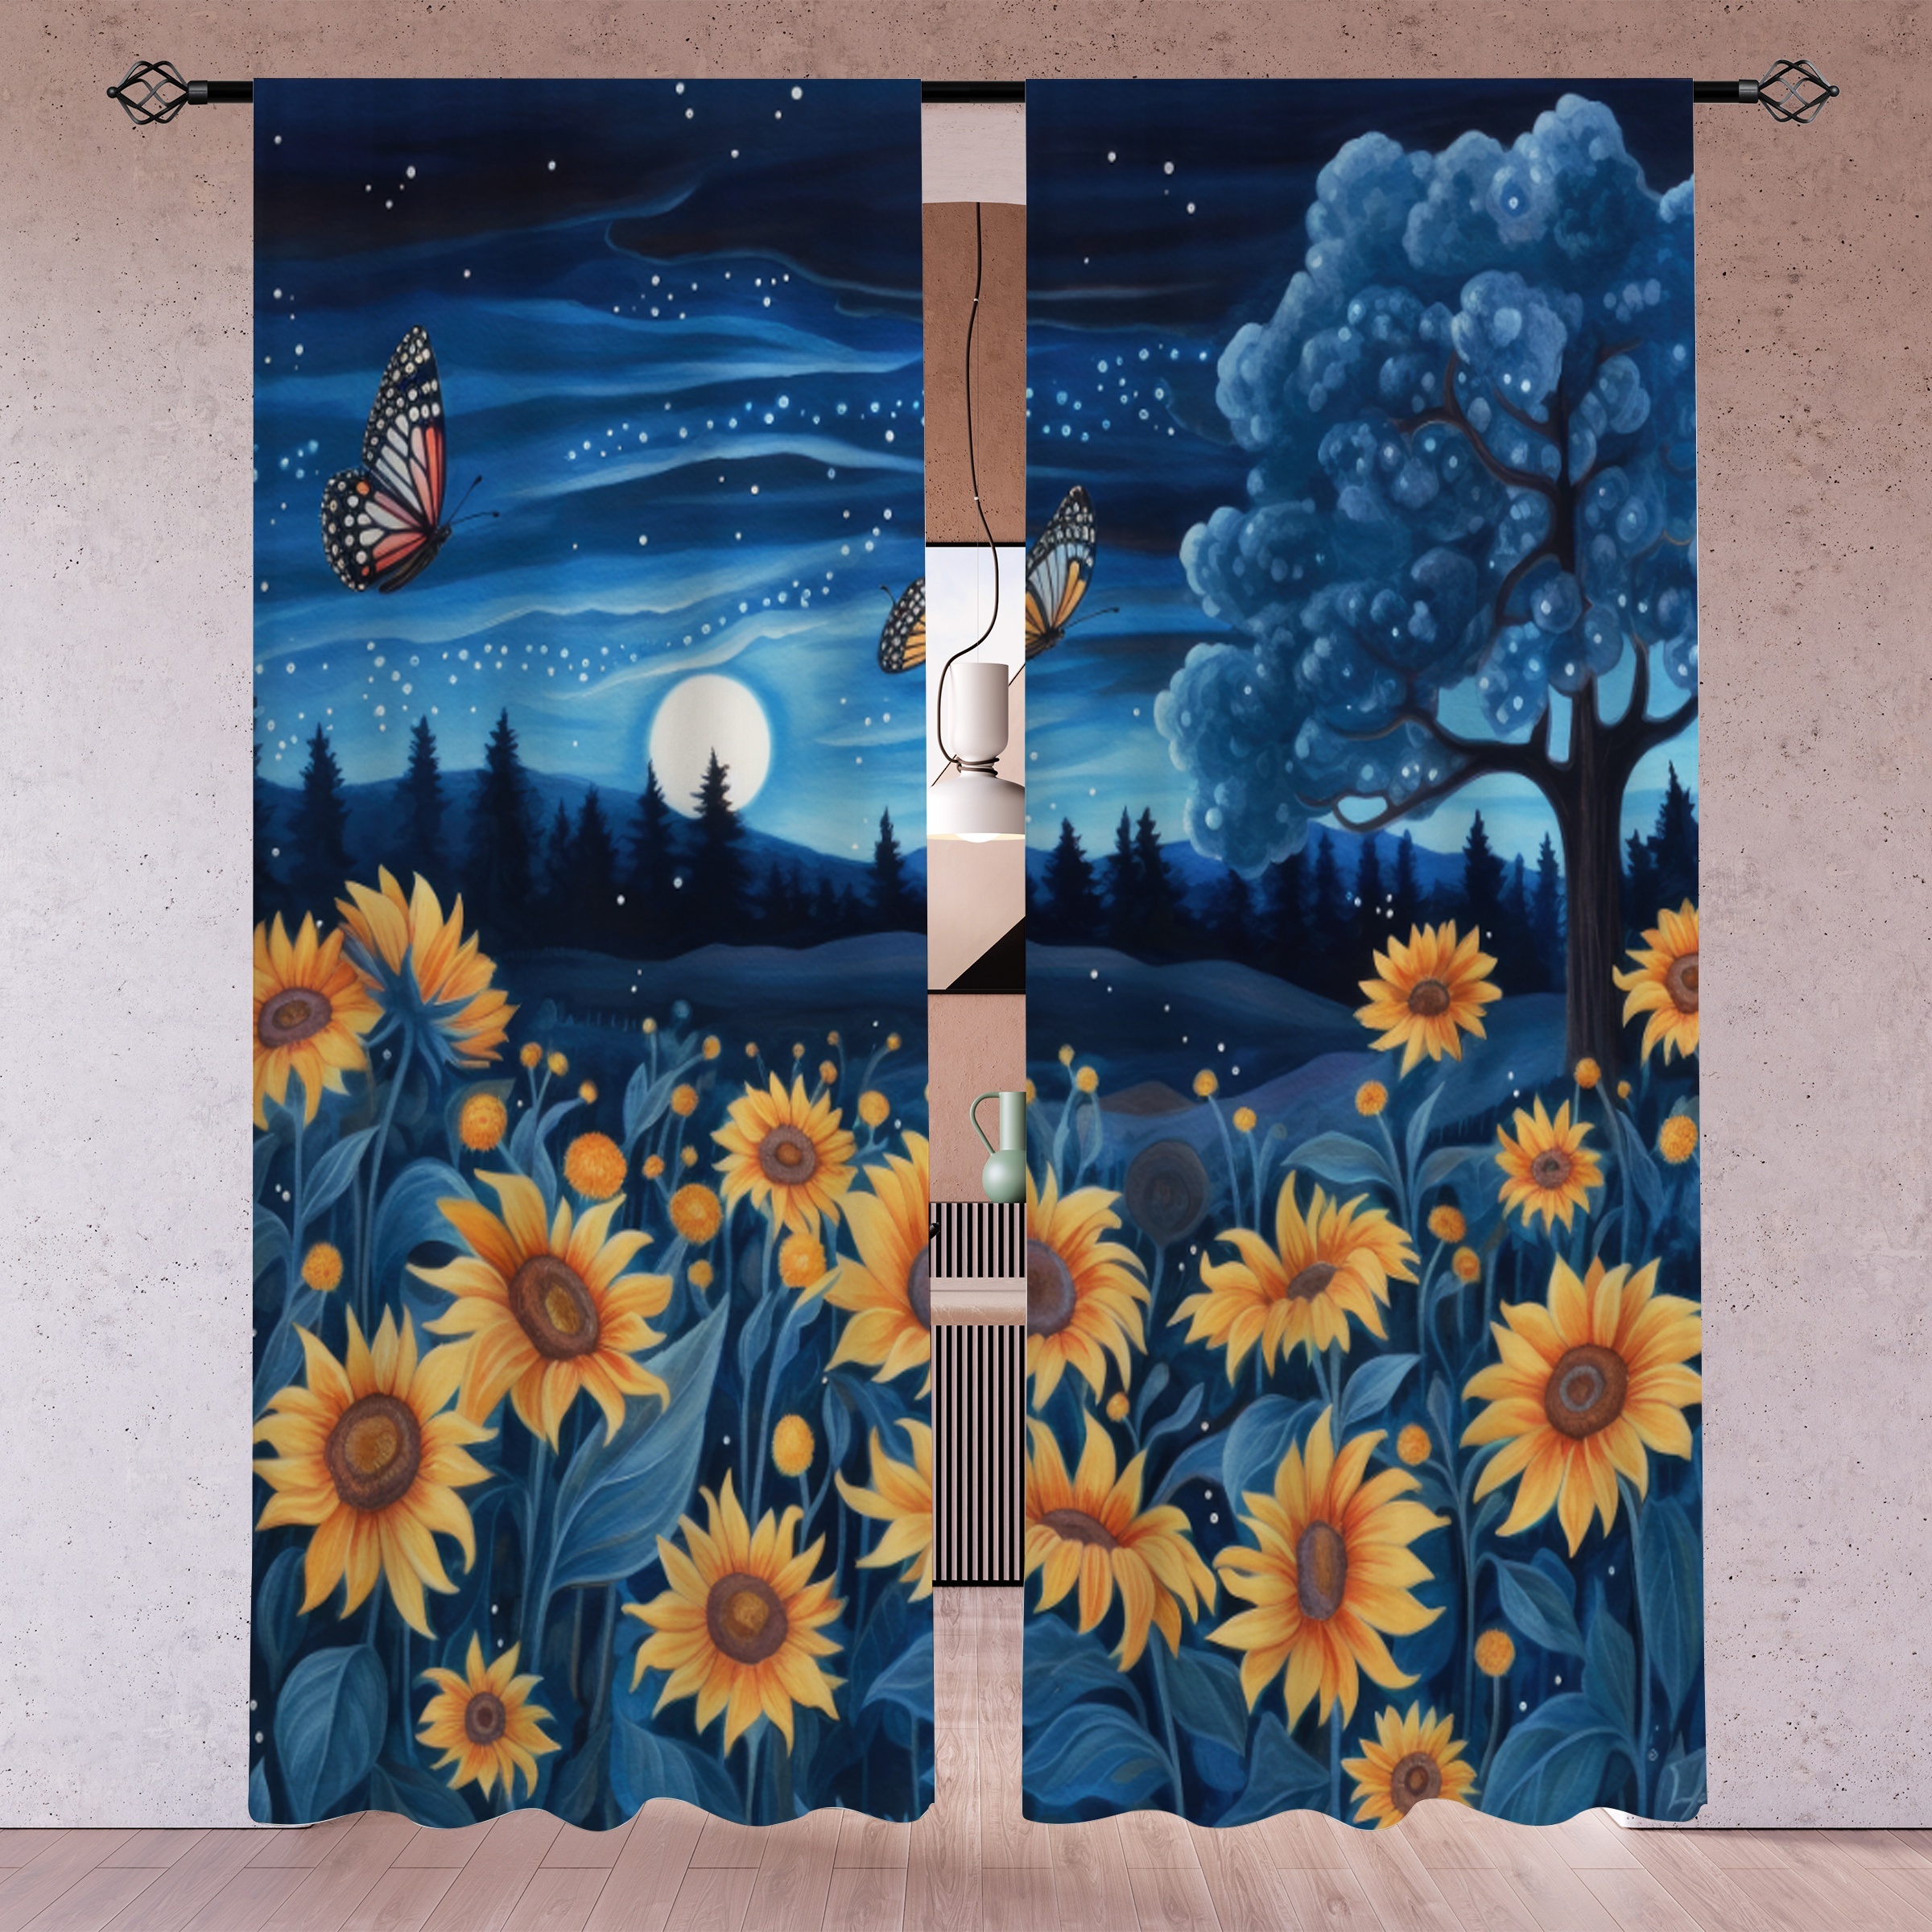 

2pcs, Moonlight Sunflower Printed Translucent Curtains, Living Room Game Room Bedroom Multi-scene Polyester Rod Pocket Decorative Curtains Home Decor Party Supplies